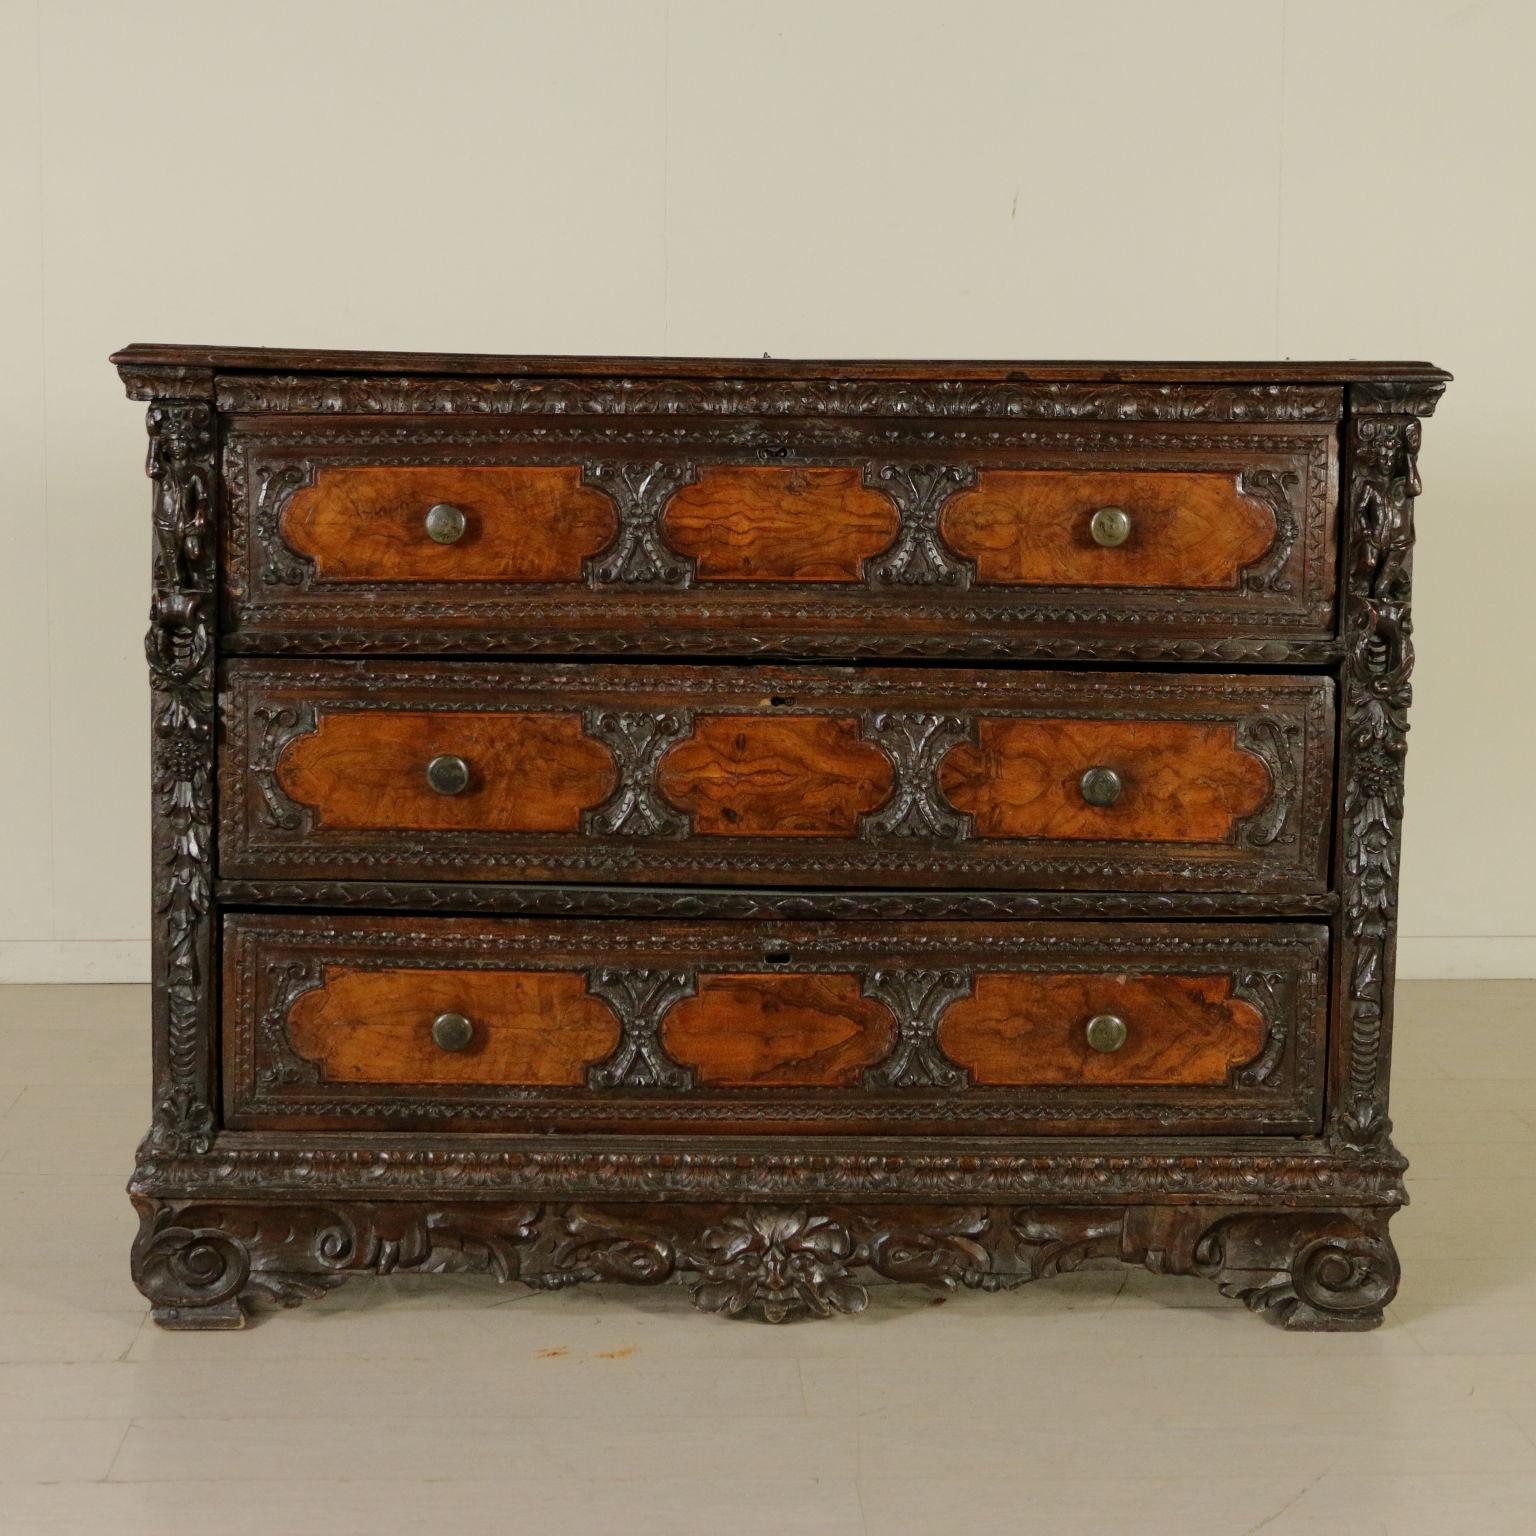 An important chest of drawers with two drawers plus a drop-leaf one. Half drop-leaf opening top that hides a showcase with four drawers and an opened central compartment. Finely carved and perforated uprights with plump children and an underlying